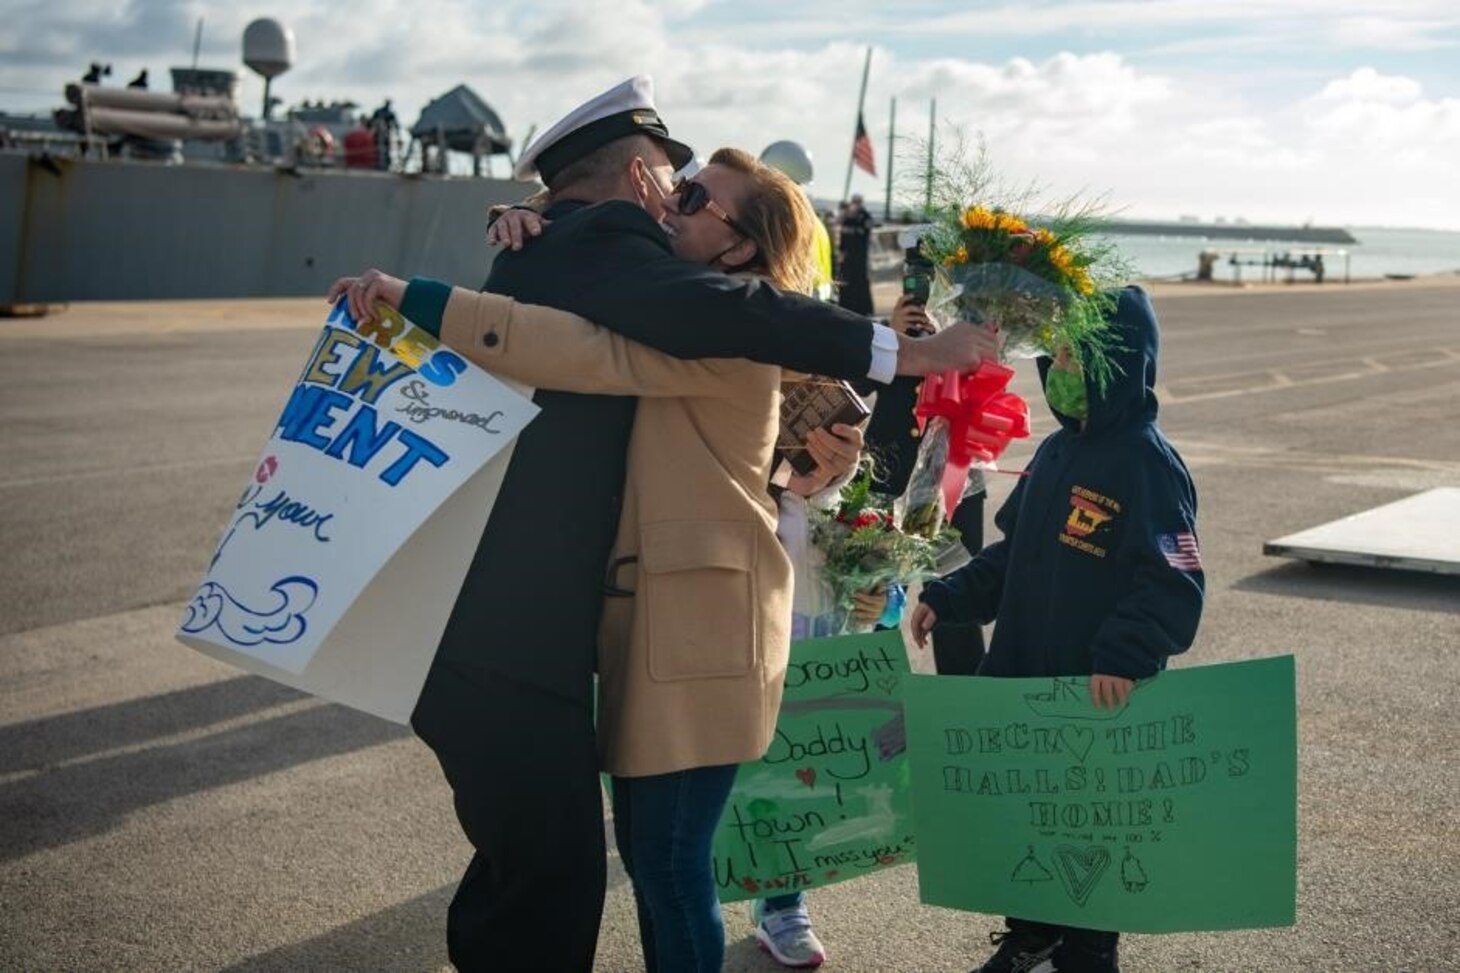 211210-N-RY670-1519 
NAVAL STATION ROTA, Spain (Dec. 10, 2021) Sailors reunite with their families after the Arleigh Burke-class guided-missile destroyer USS Porter (DDG 78) returns to Naval Station (NAVSTA) Rota, Spain, Dec. 10, 2021. Porter concluded its 10th patrol in the U.S. Sixth Fleet area of operations in support of U.S. national security interests in Europe and Africa. (U.S. Navy photo by Mass Communication Specialist 2nd Class Jacob Owen)